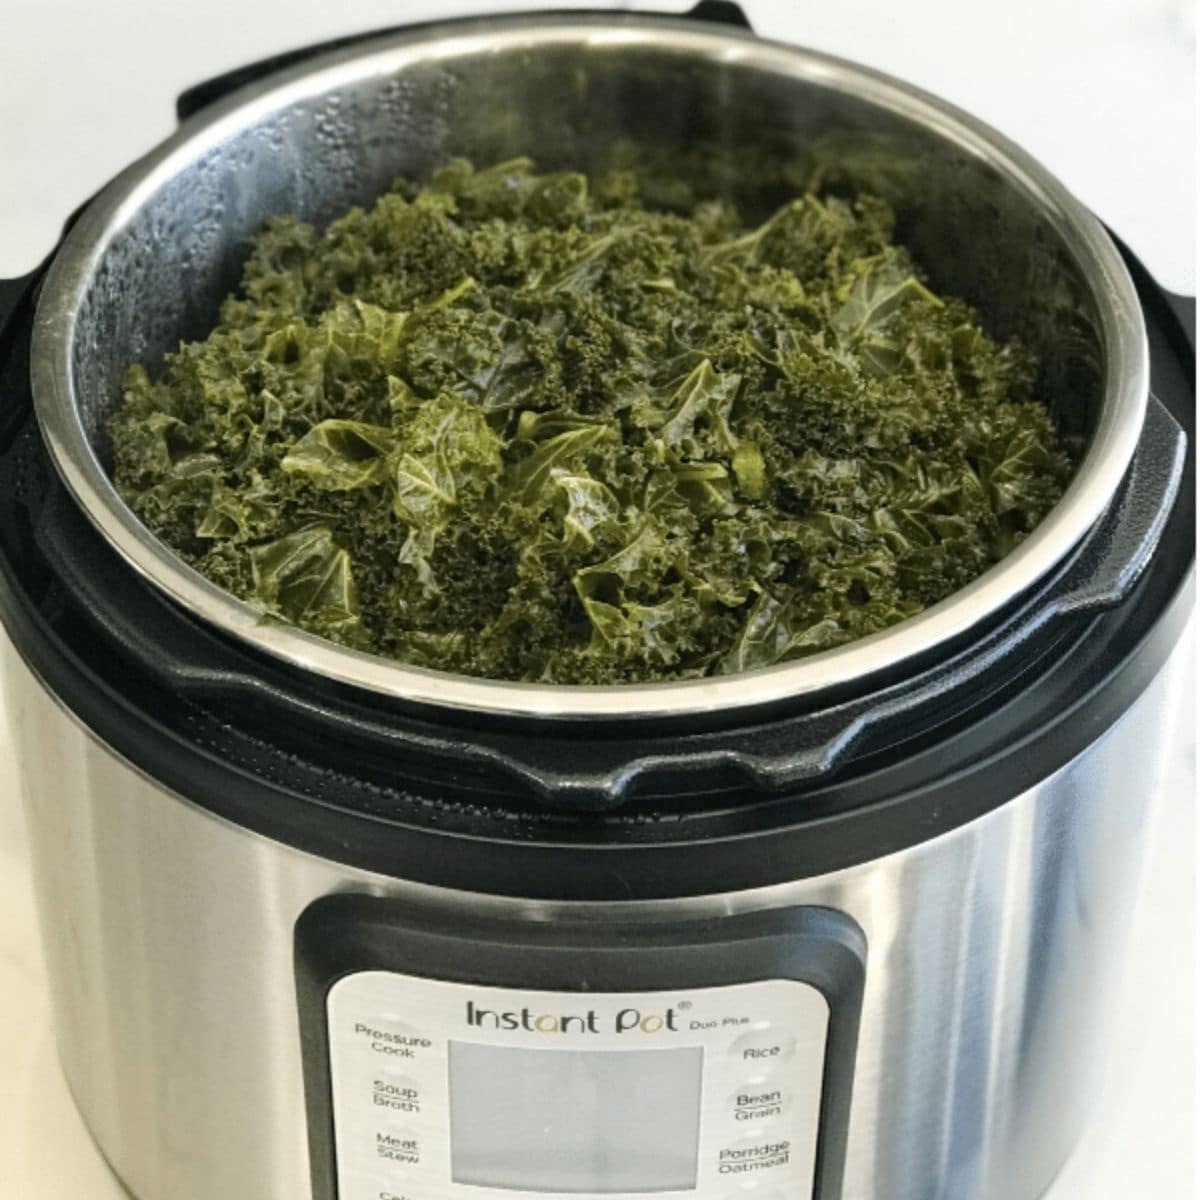 How Long To Cook Kale In Slow Cooker